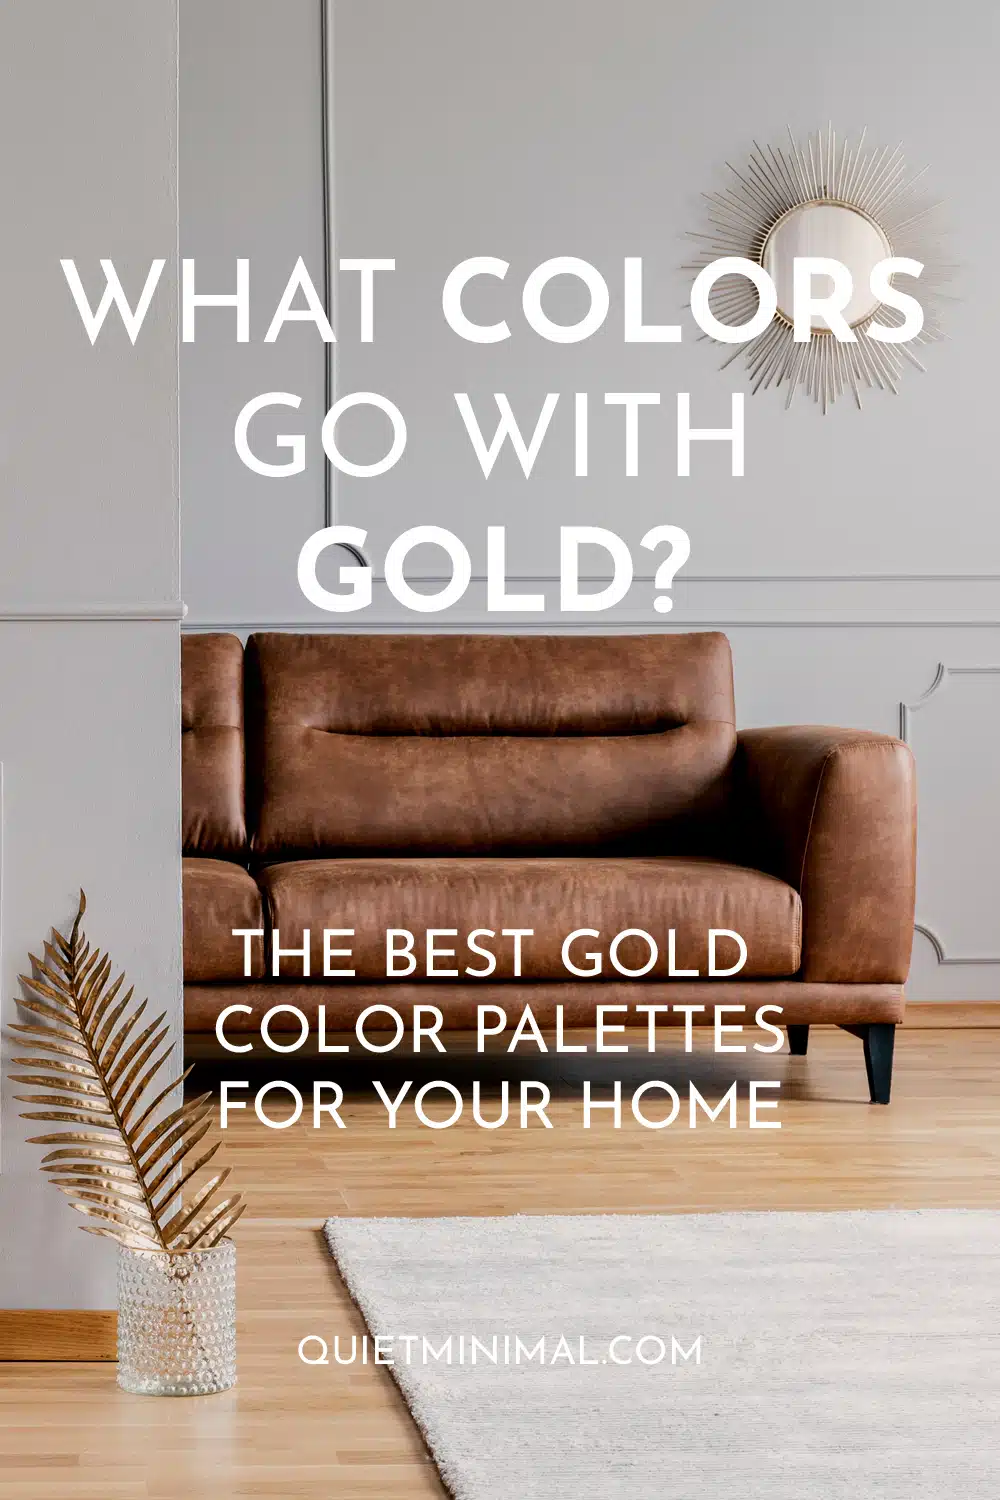 What colors go with gold, the best gold palettes for your home